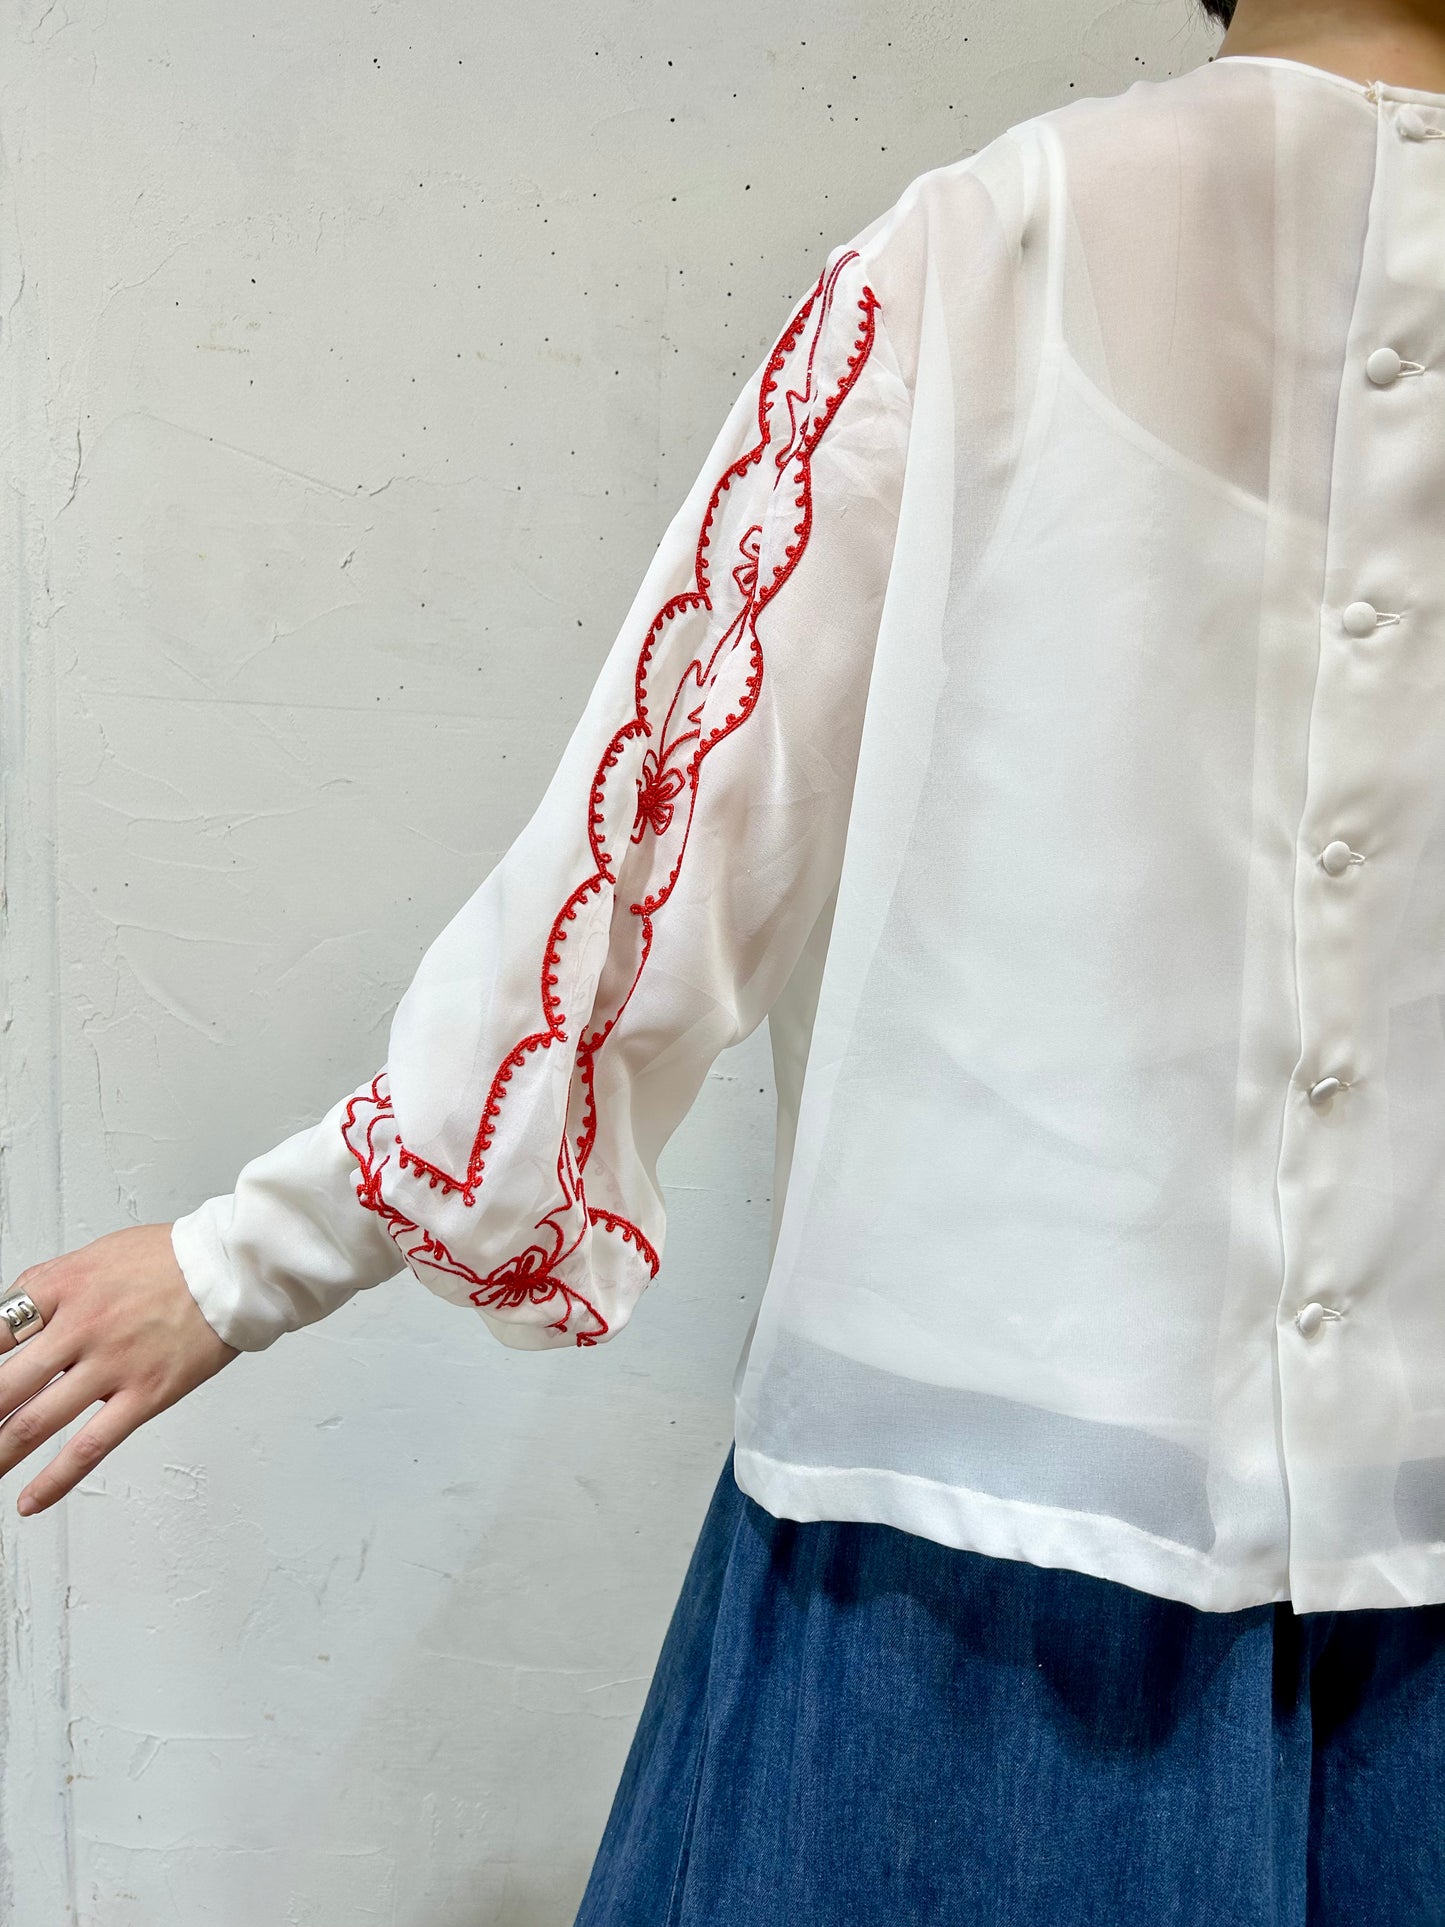 Vintage Embroidery Blouse [I24912]